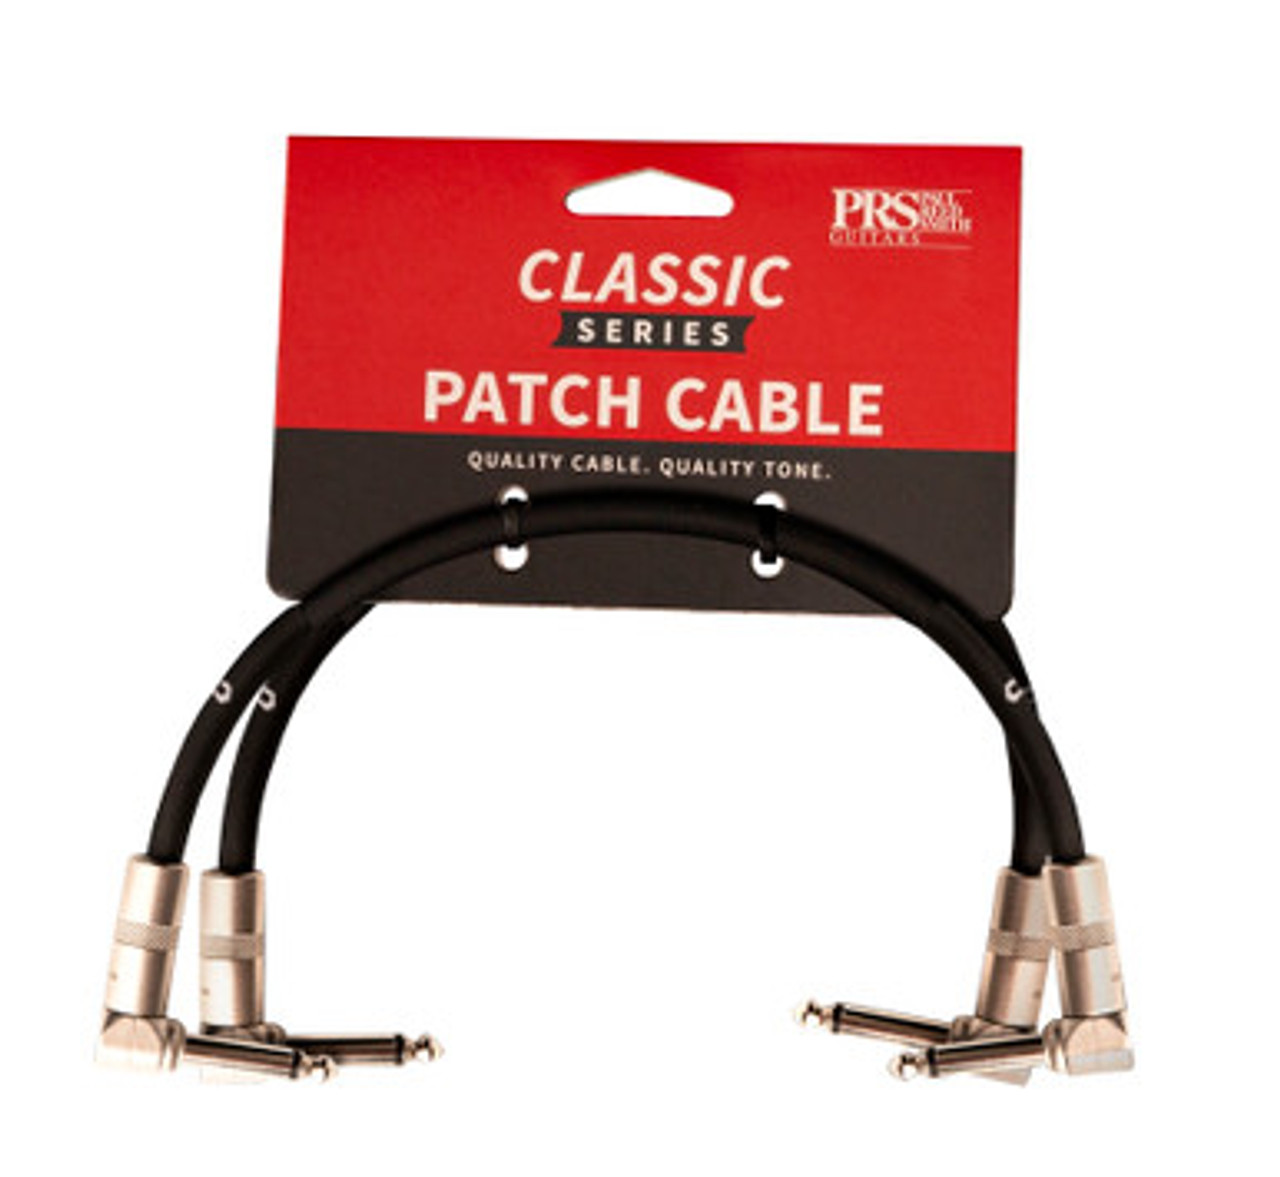 PRS Classic Series 6" Pedal Patch Cables (Set of 2)